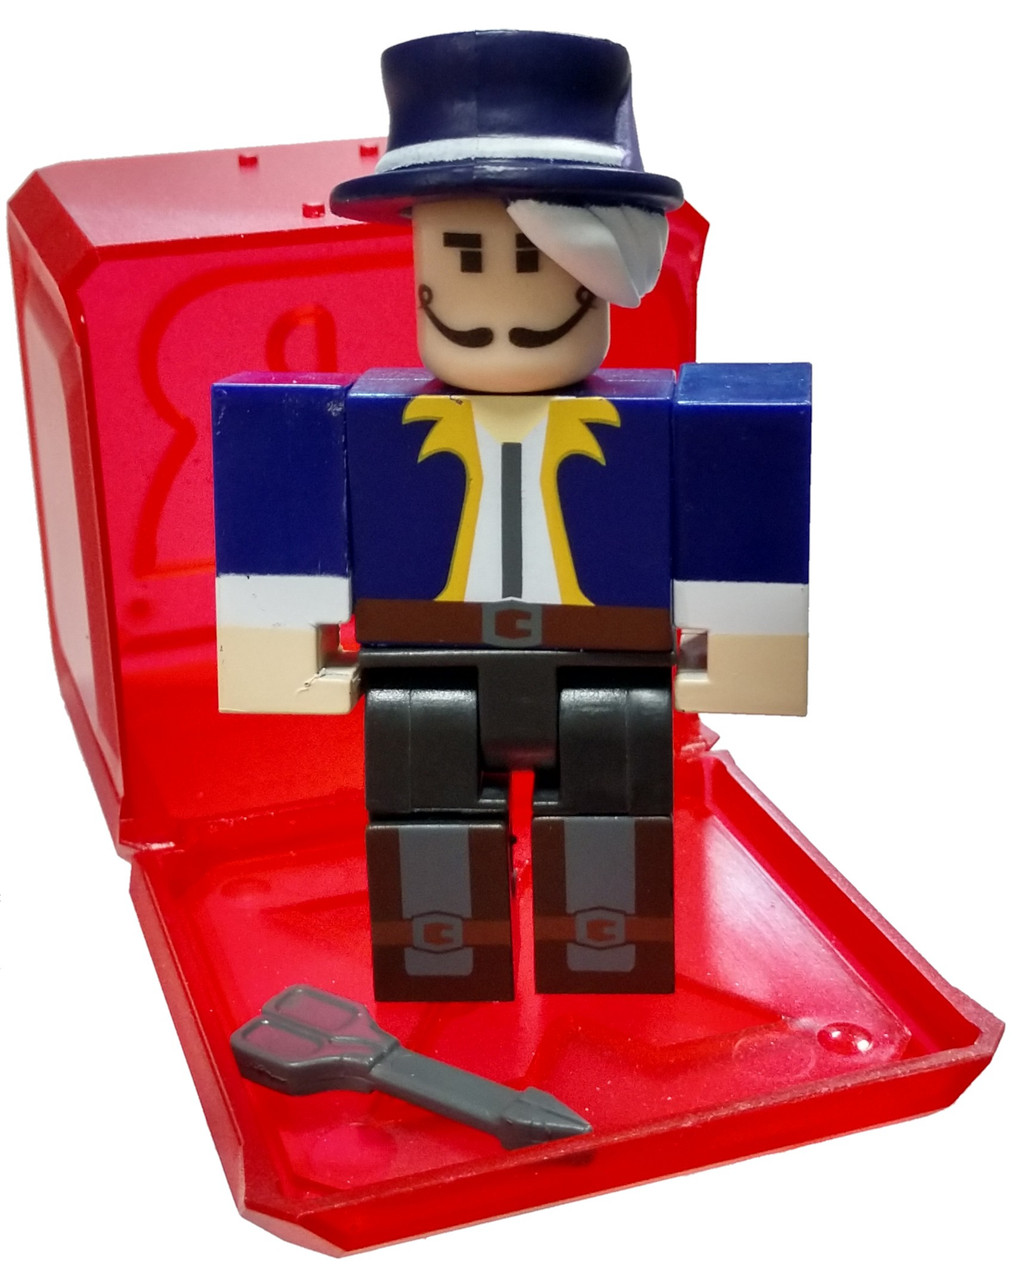 Roblox Celebrity Collection Series 5 Vesteria Barber S 3 Mini Figure With Red Cube And Online Code Loose Jazwares Toywiz - roblox loleris legends of roblox mini action figure kid